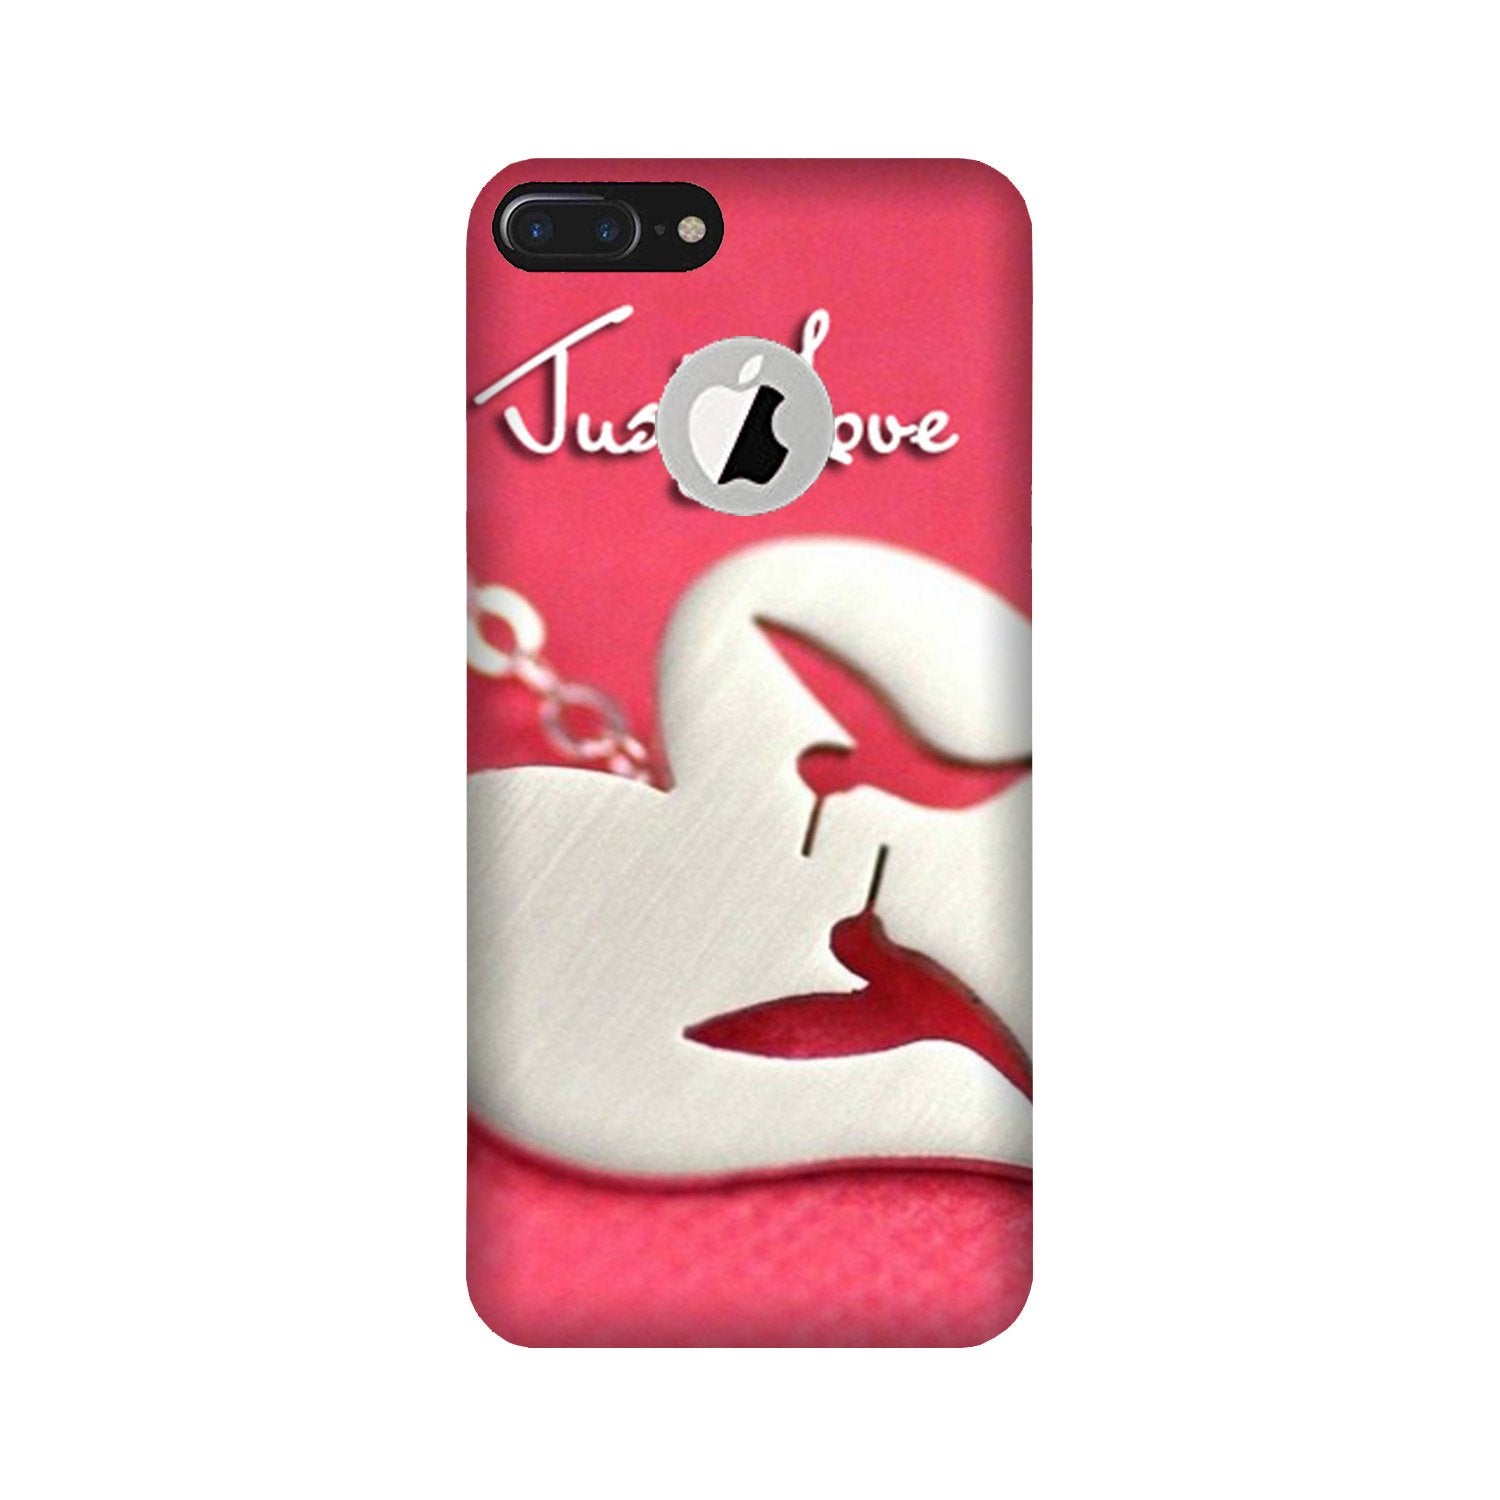 Just love Case for iPhone 7 Plus logo cut